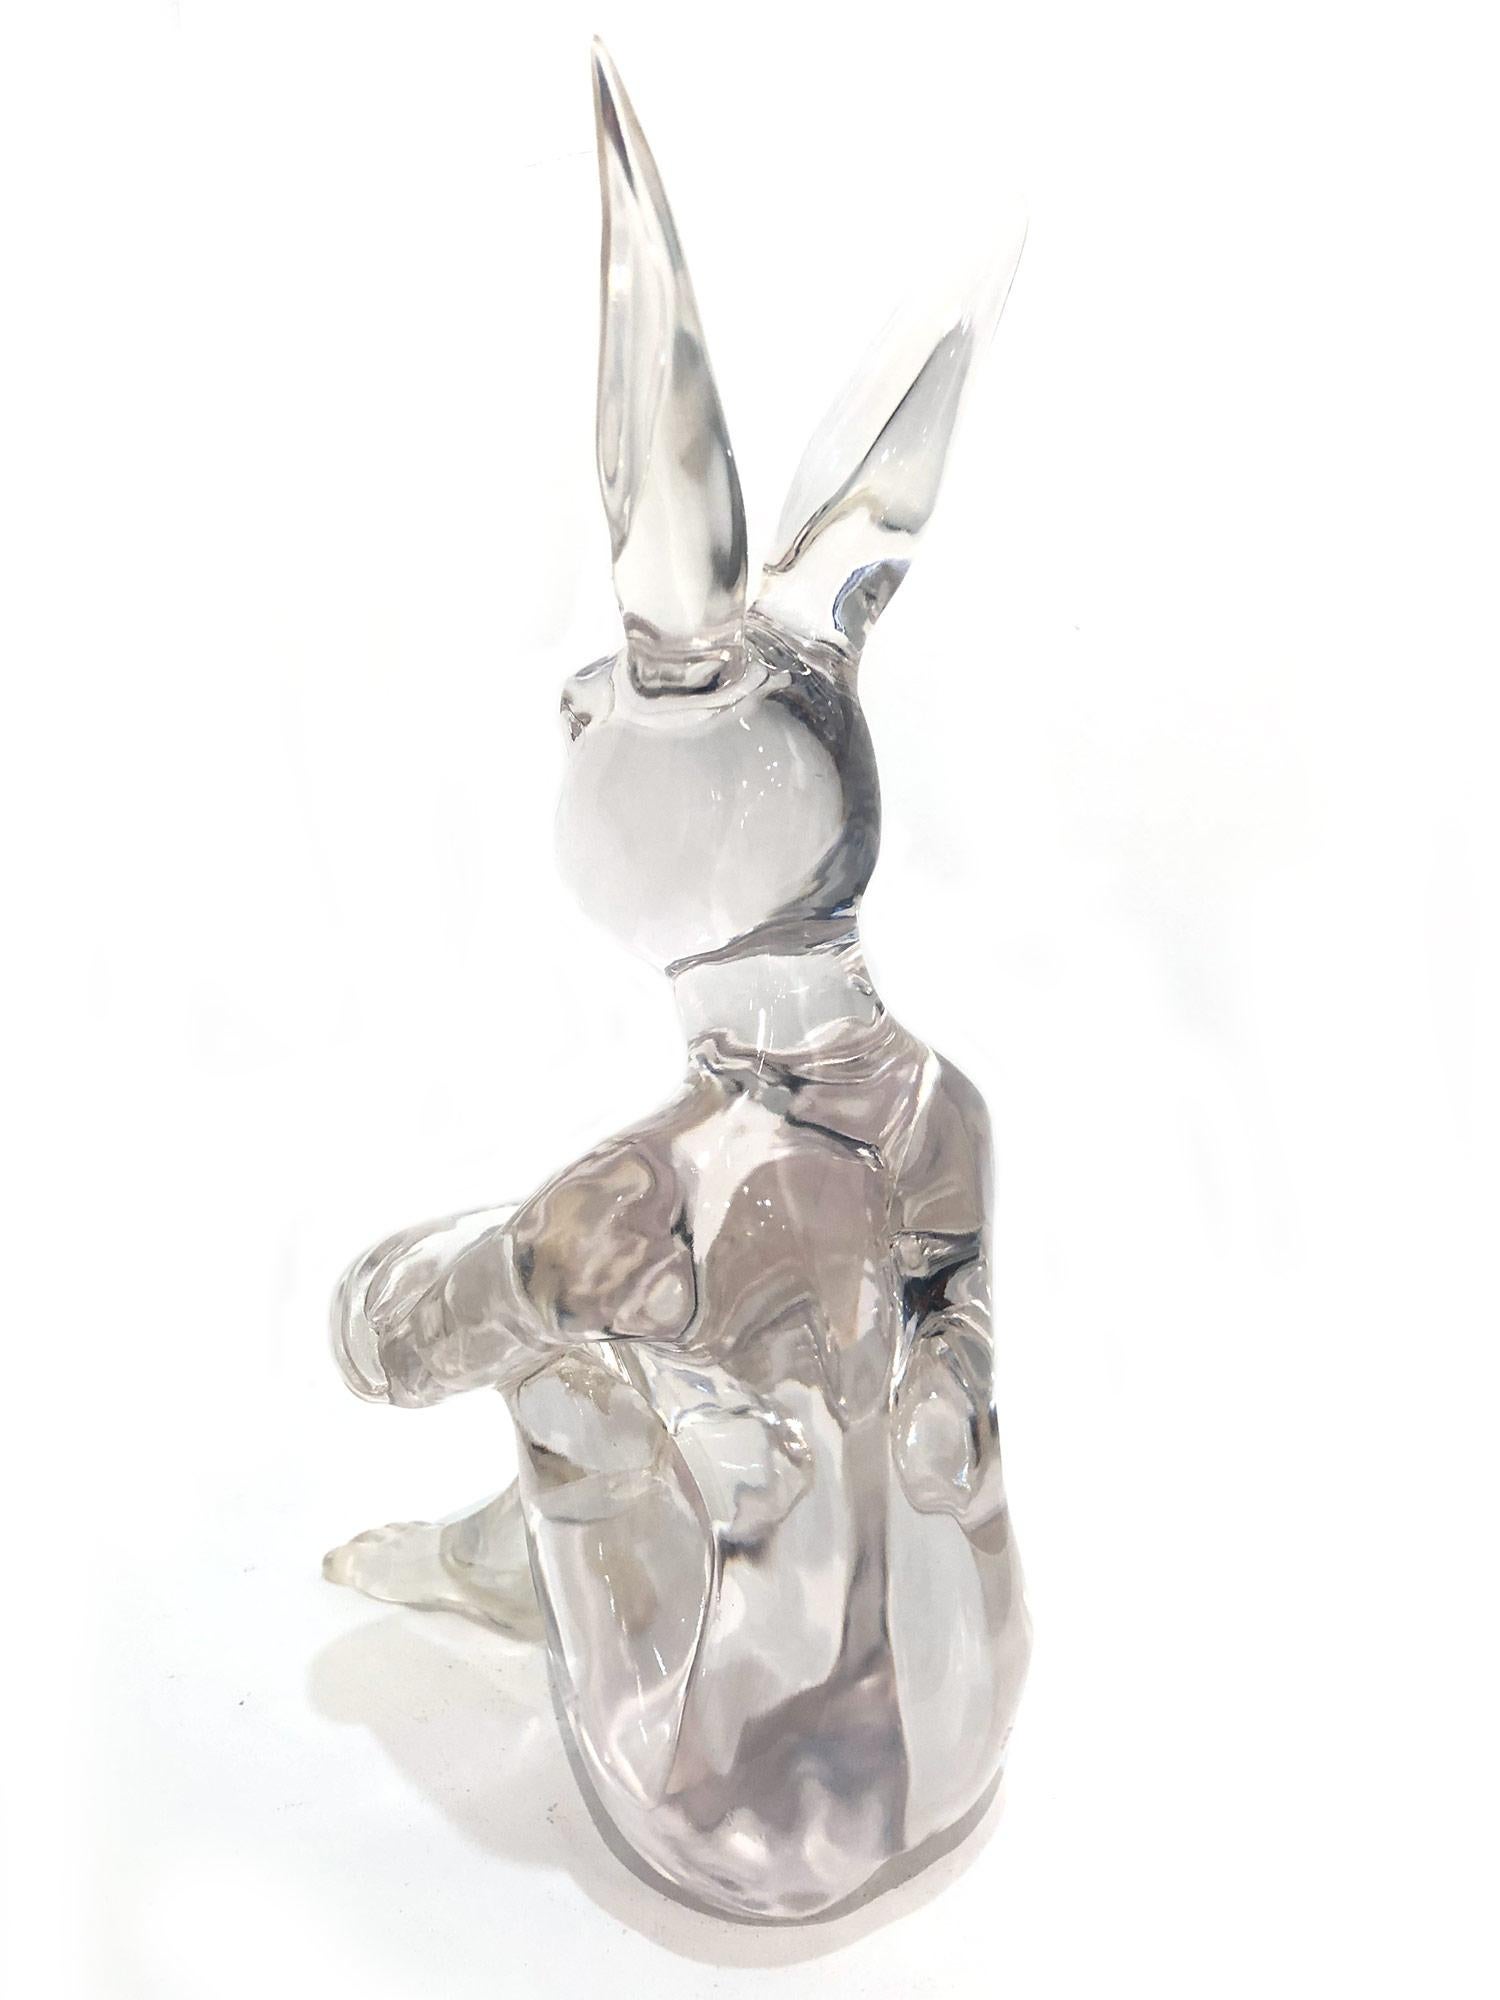 A whimsical yet very strong piece depicting the Rabbit from Gillie and Marc's iconic figures of the Dog/Bunny Human Hybrid, which has picked up much esteem across the globe. Here we find Rabbit sitting in a very sophisticated and yet relaxed